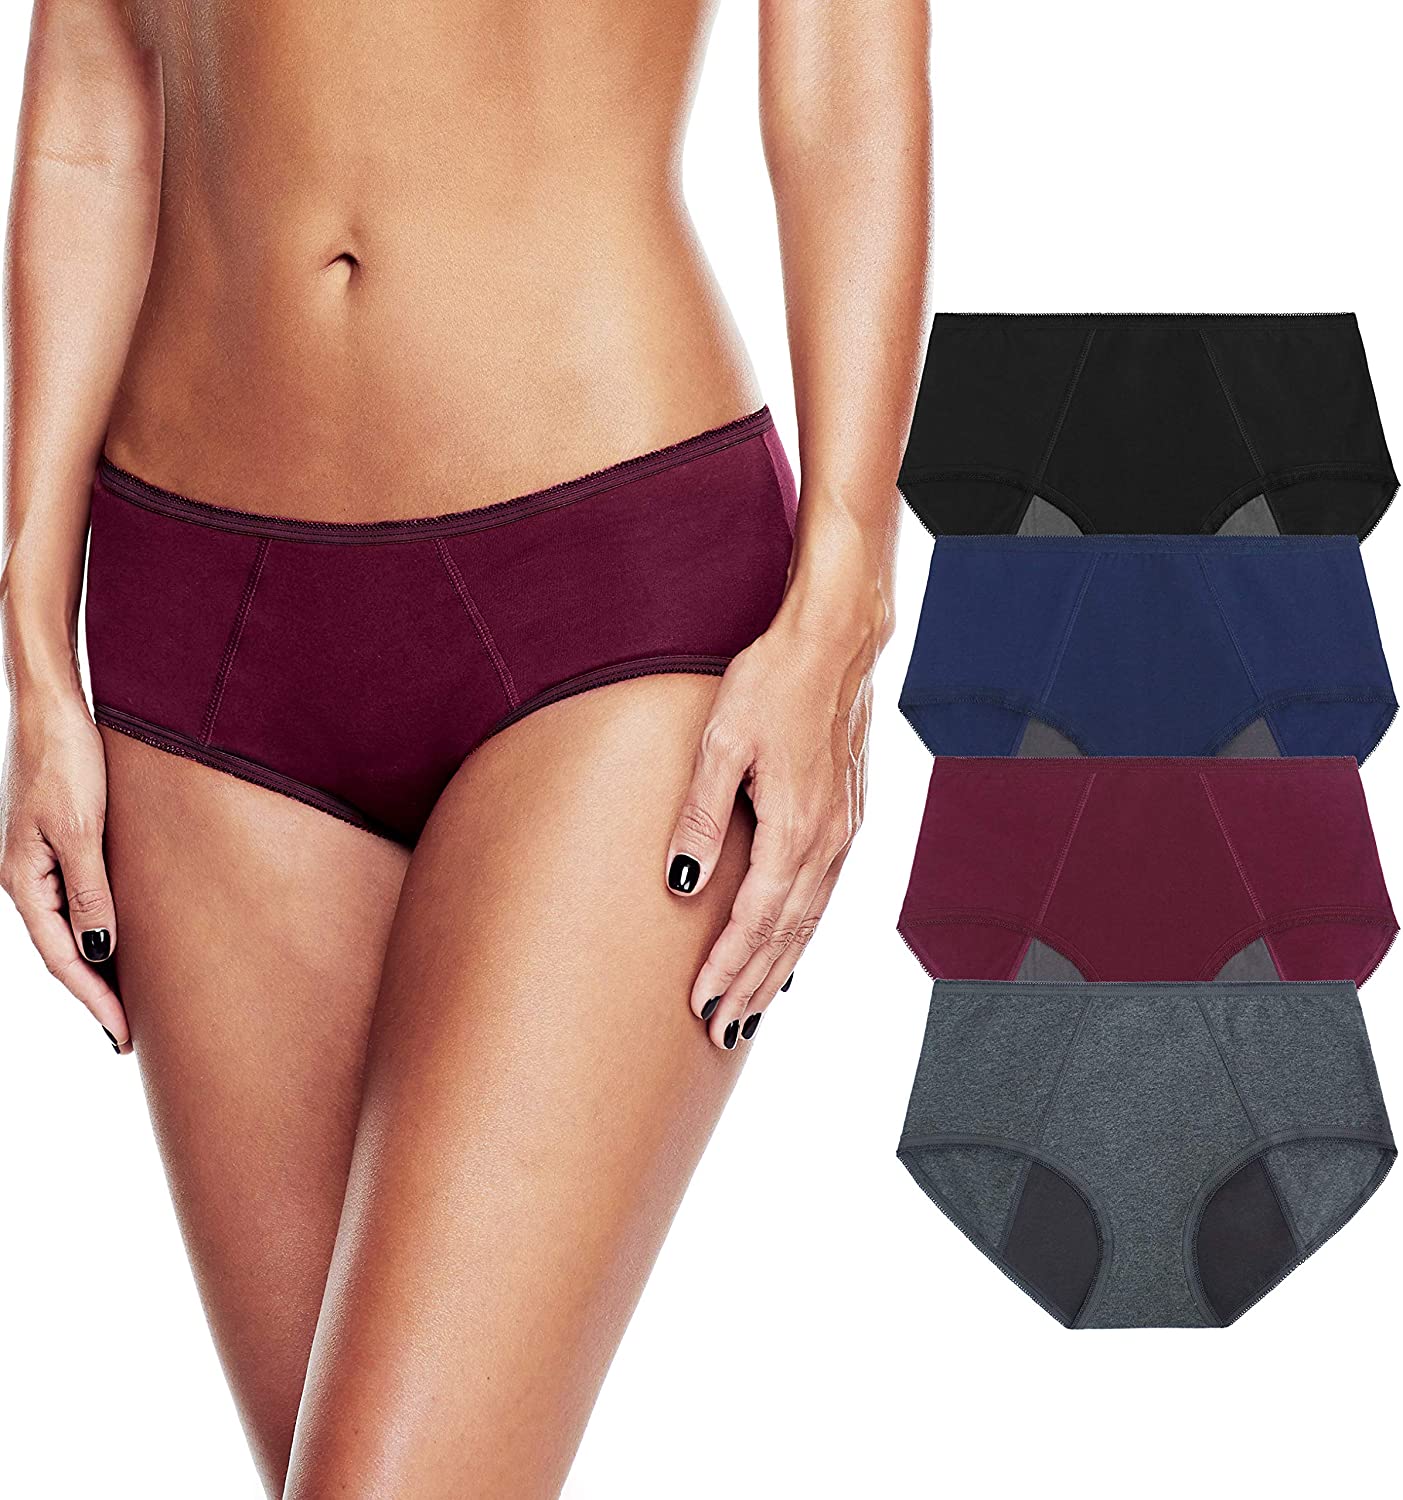 New Balance Women's Breathable Hipster Panty 3-Pack, Stretchable Durable  Underwear, Black/Pigment/Desert Rose, X-Large at  Women's Clothing  store